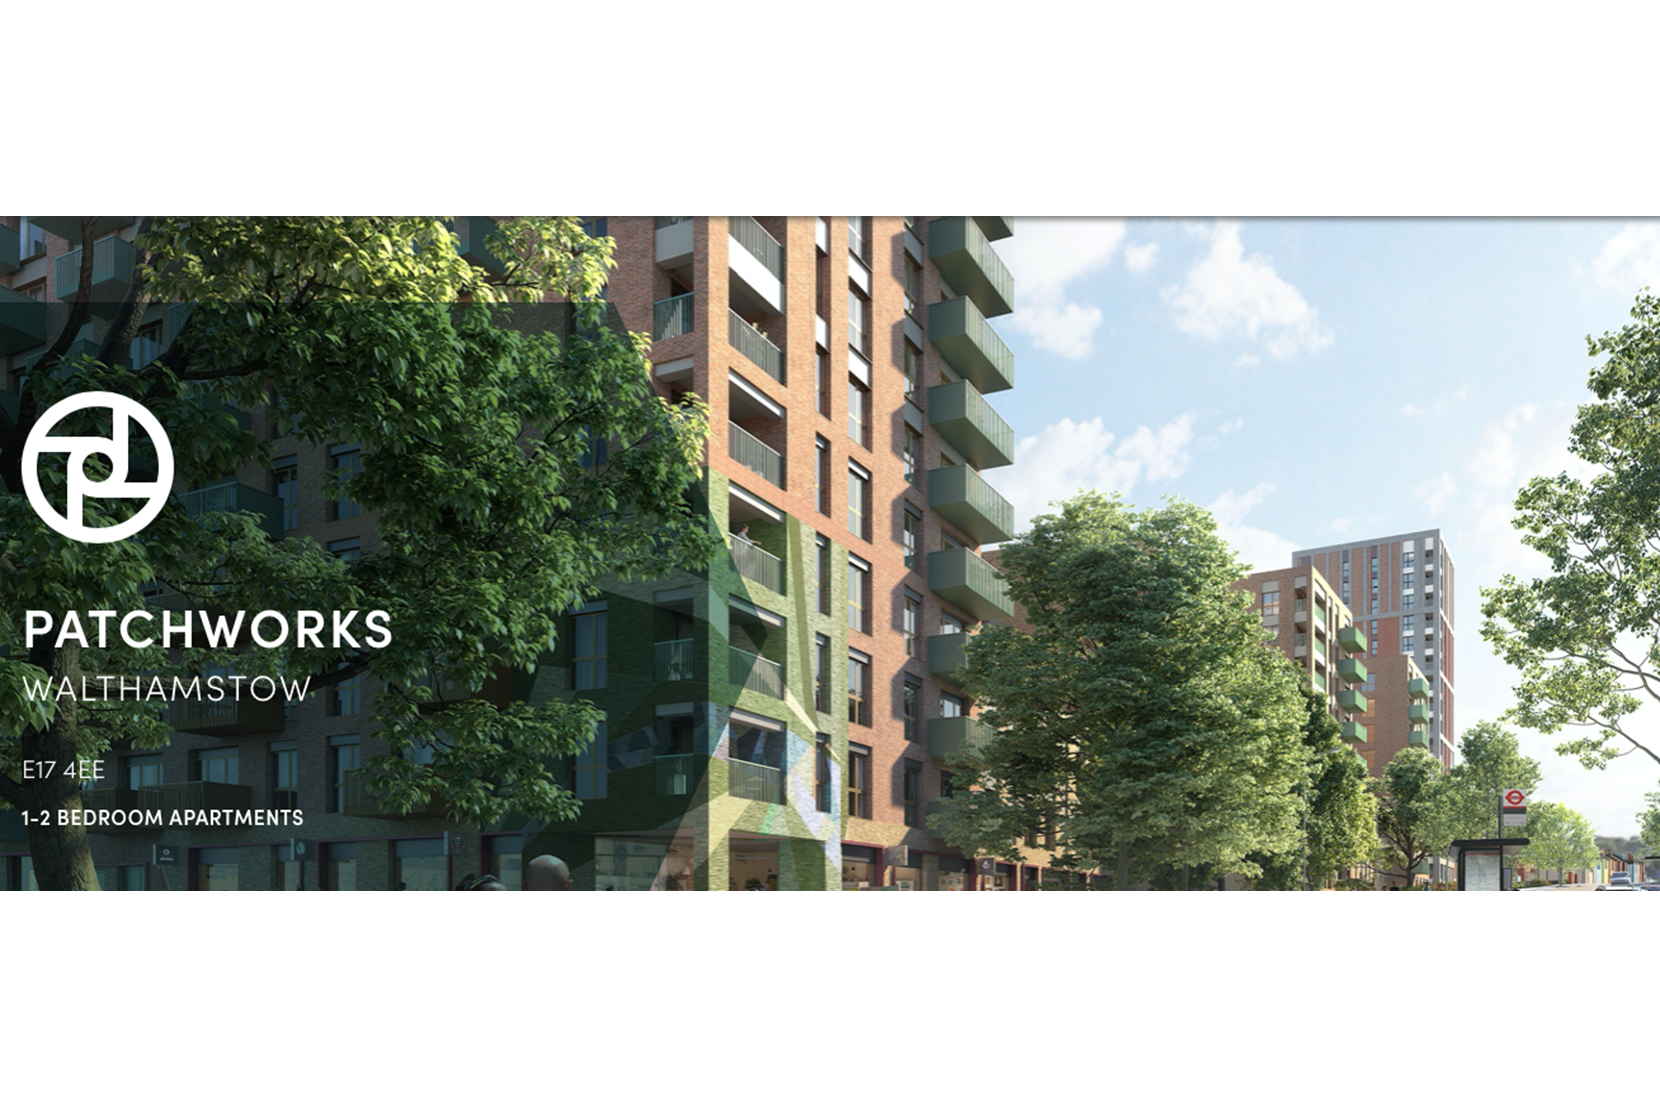 Apartments to Rent by Simple Life London in Patchworks, Walthamstow, E17, building panoramic view